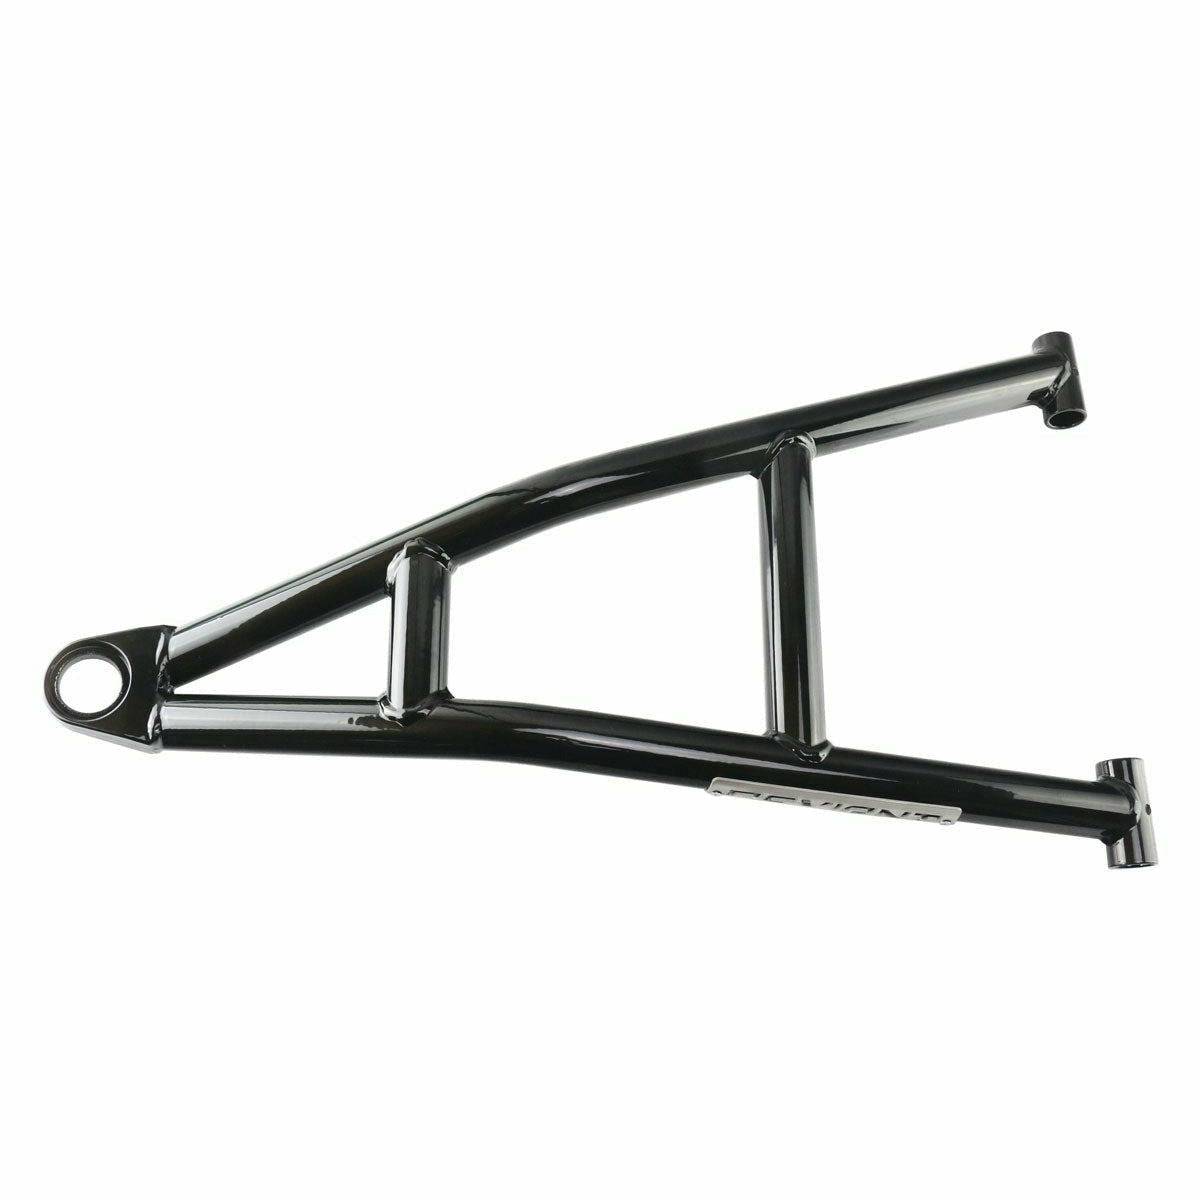 Deviant Polaris RZR XP 1000/Turbo (2014-2019) High Clearance Lower Control Arms